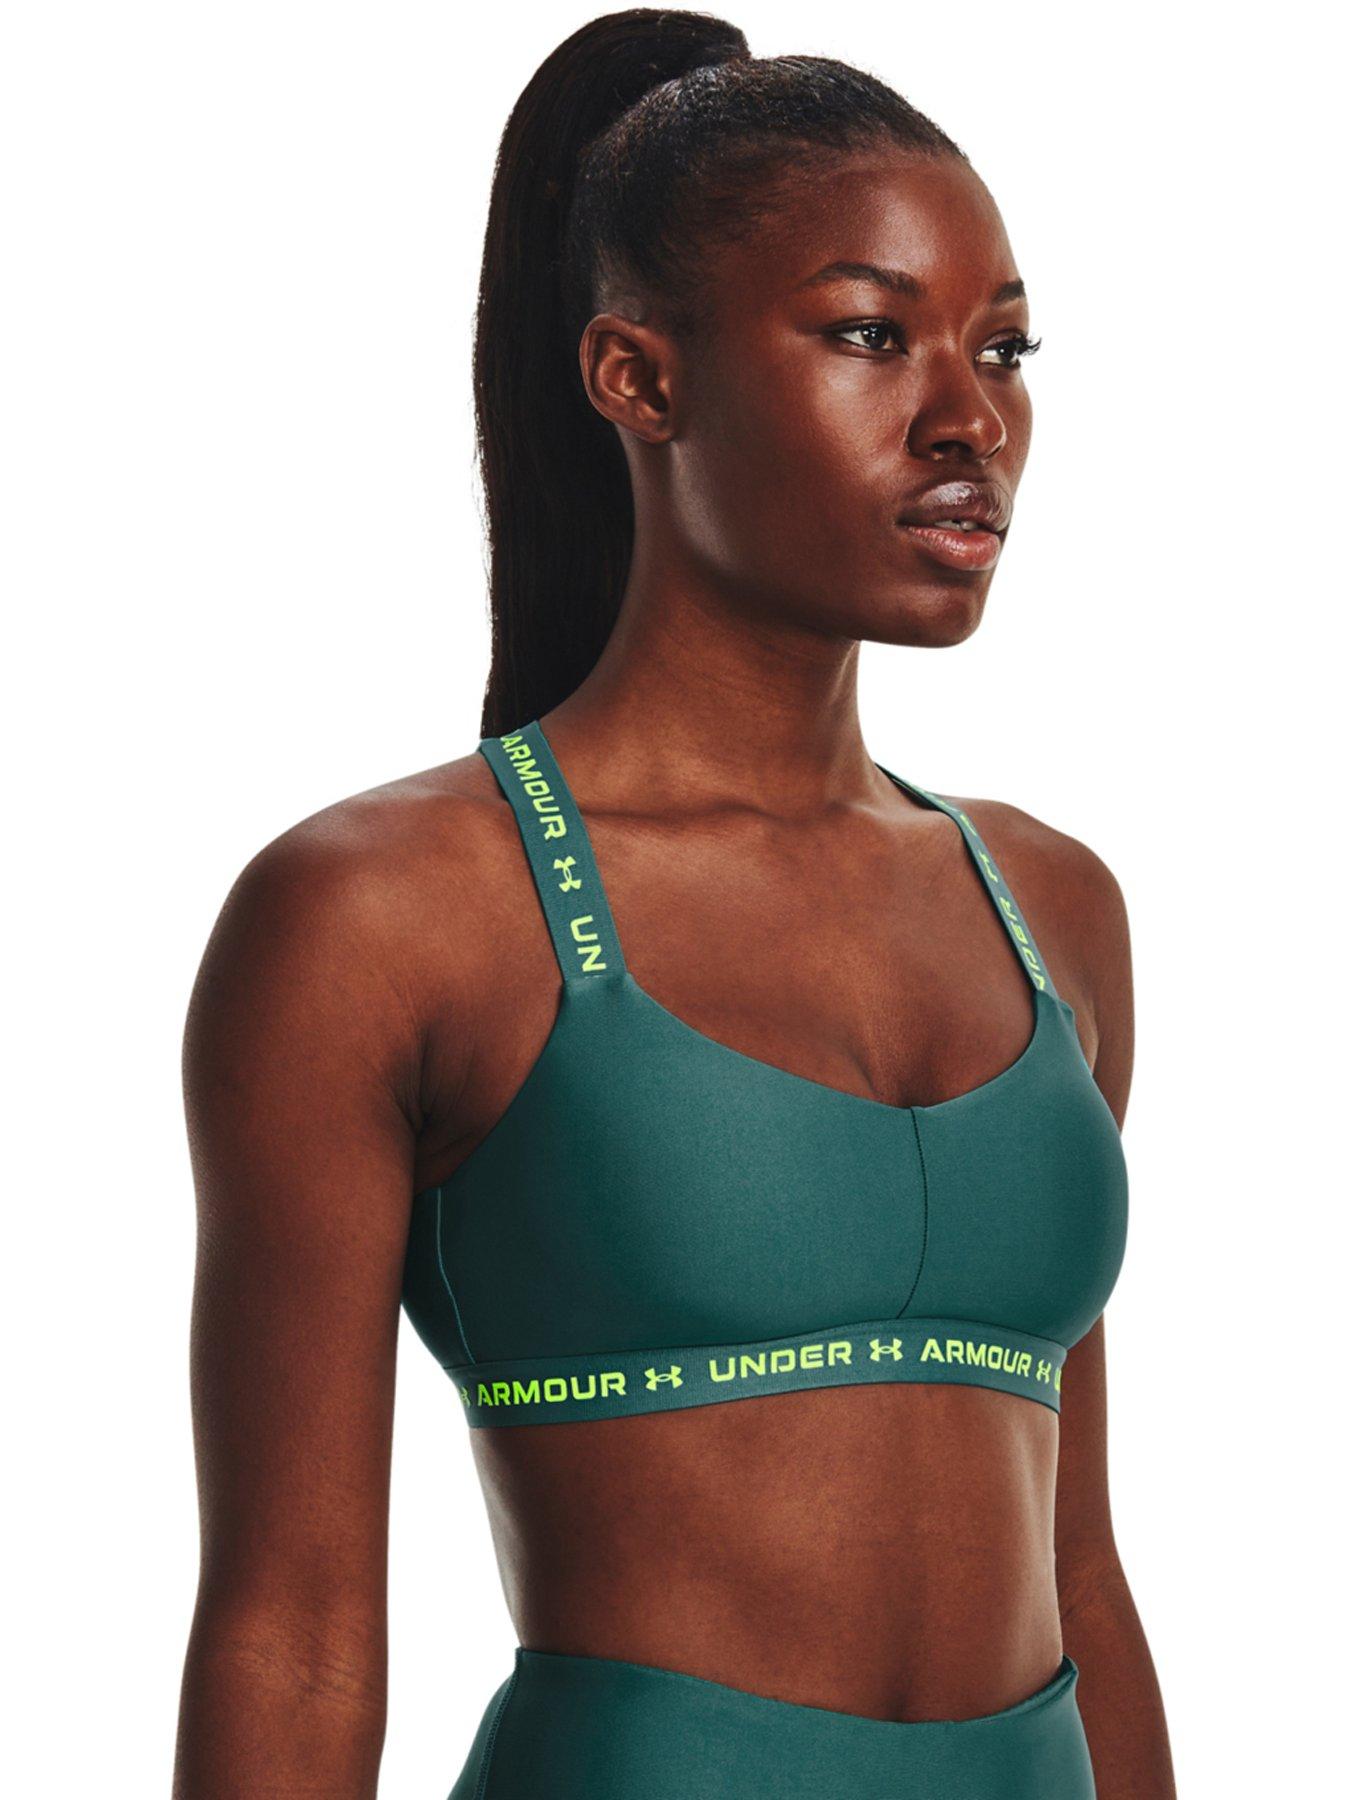 UNDER ARMOUR Crossback Low Support Bra - Green